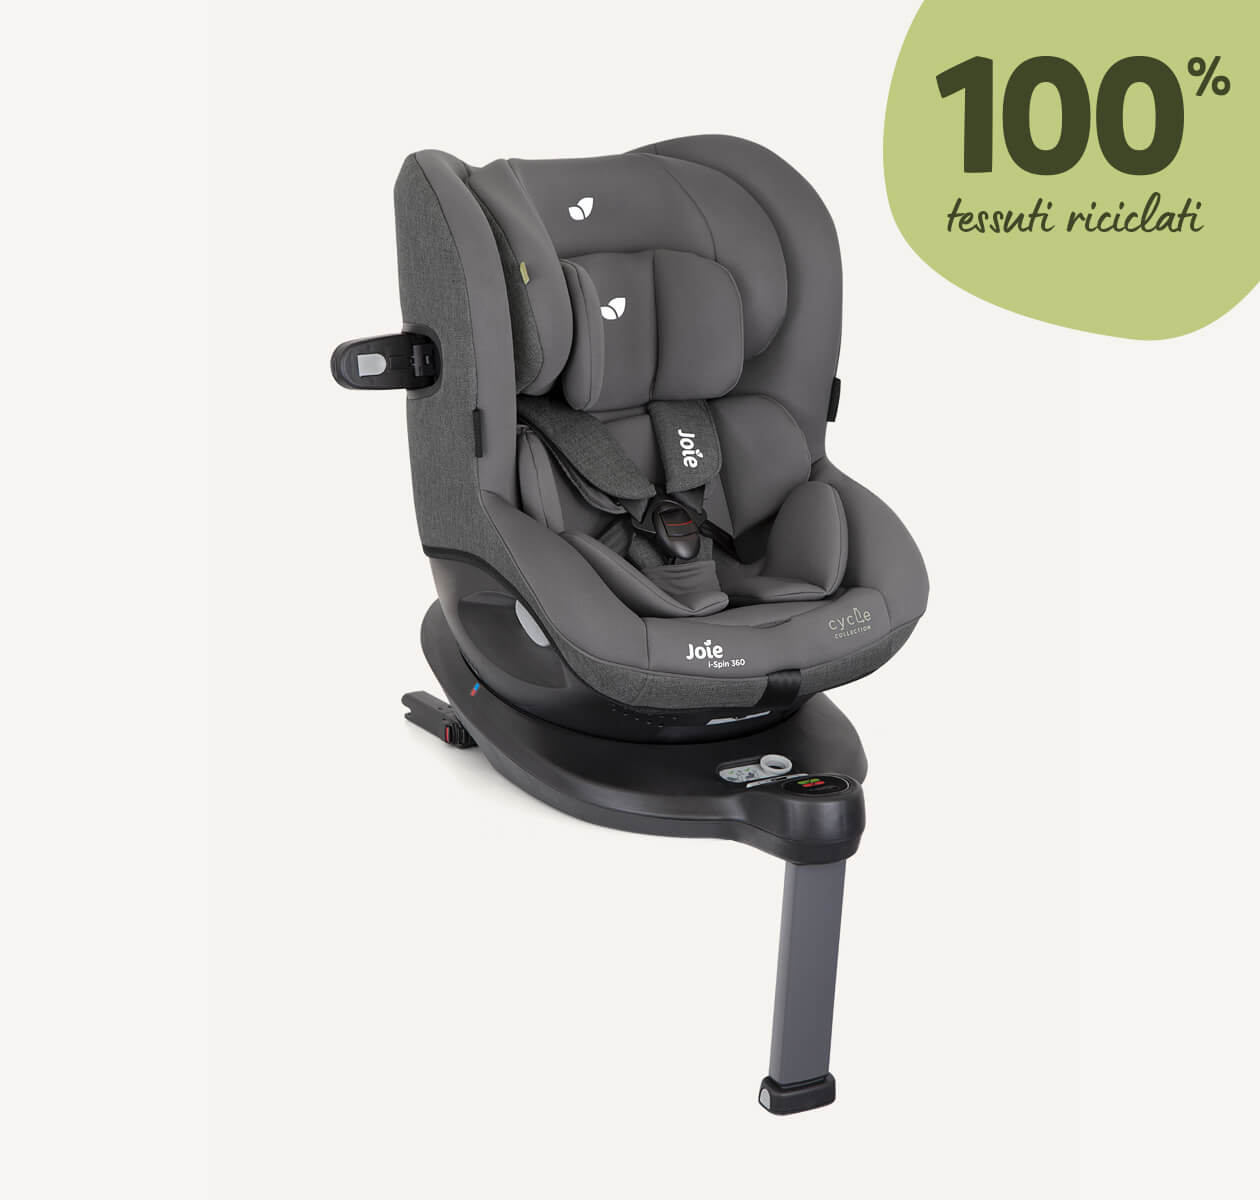 Gray Joie I-Spin 360 spinning car seat facing to the right at a 45 degree angle with the infant insert in and the headrest at the lowest position, with the ADAC test label in the lower right corner.